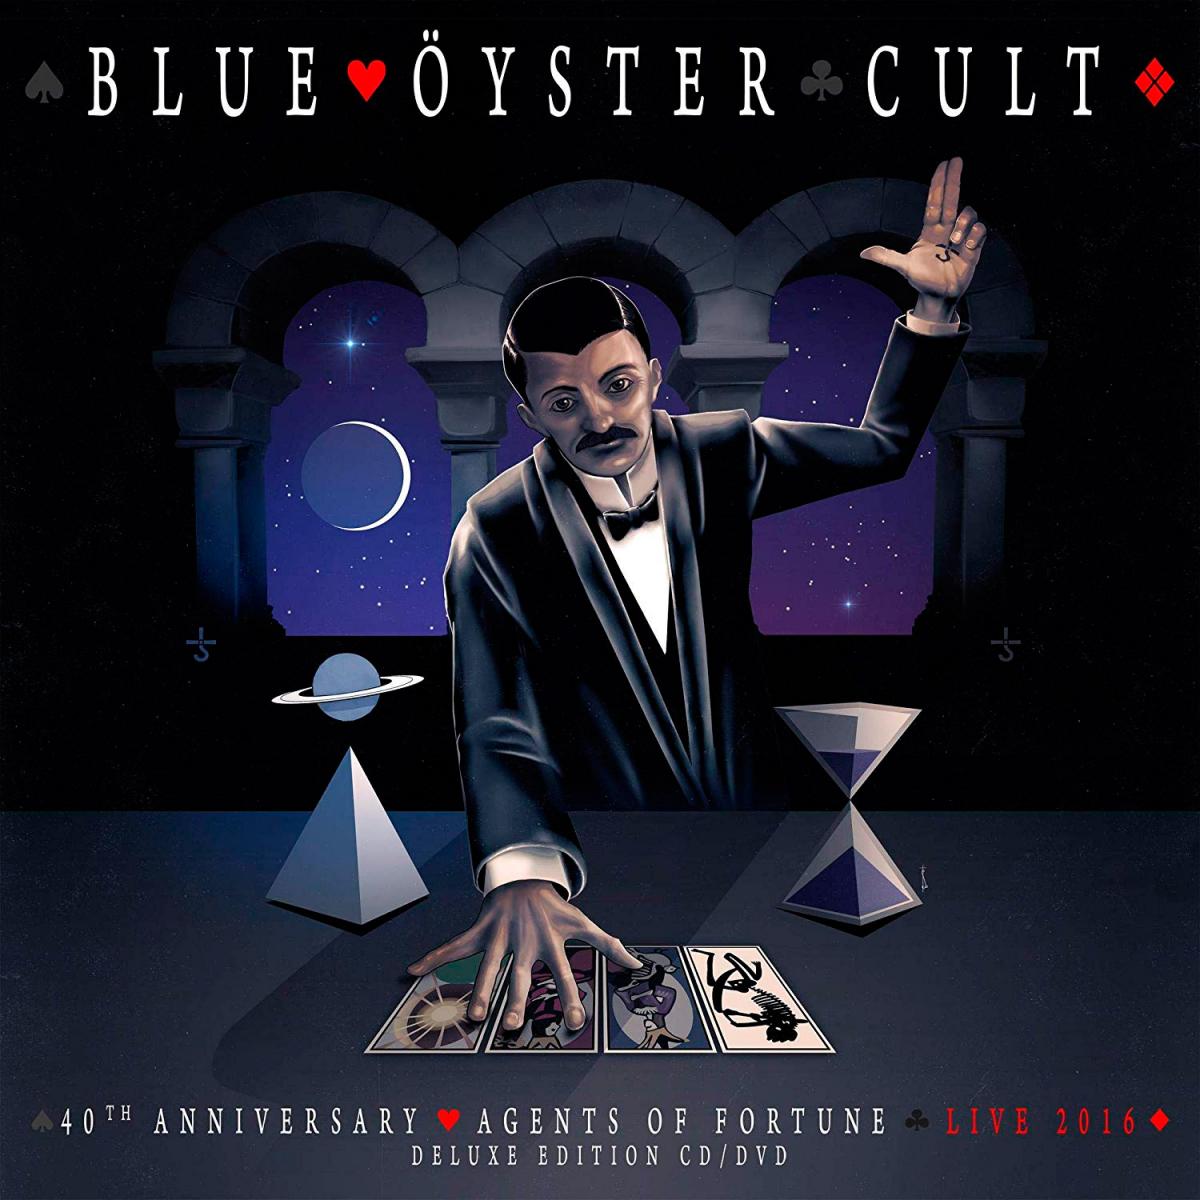 BLUE ÖYSTER CULT - 40th Anniversary Agents Of Fortune Live 2016